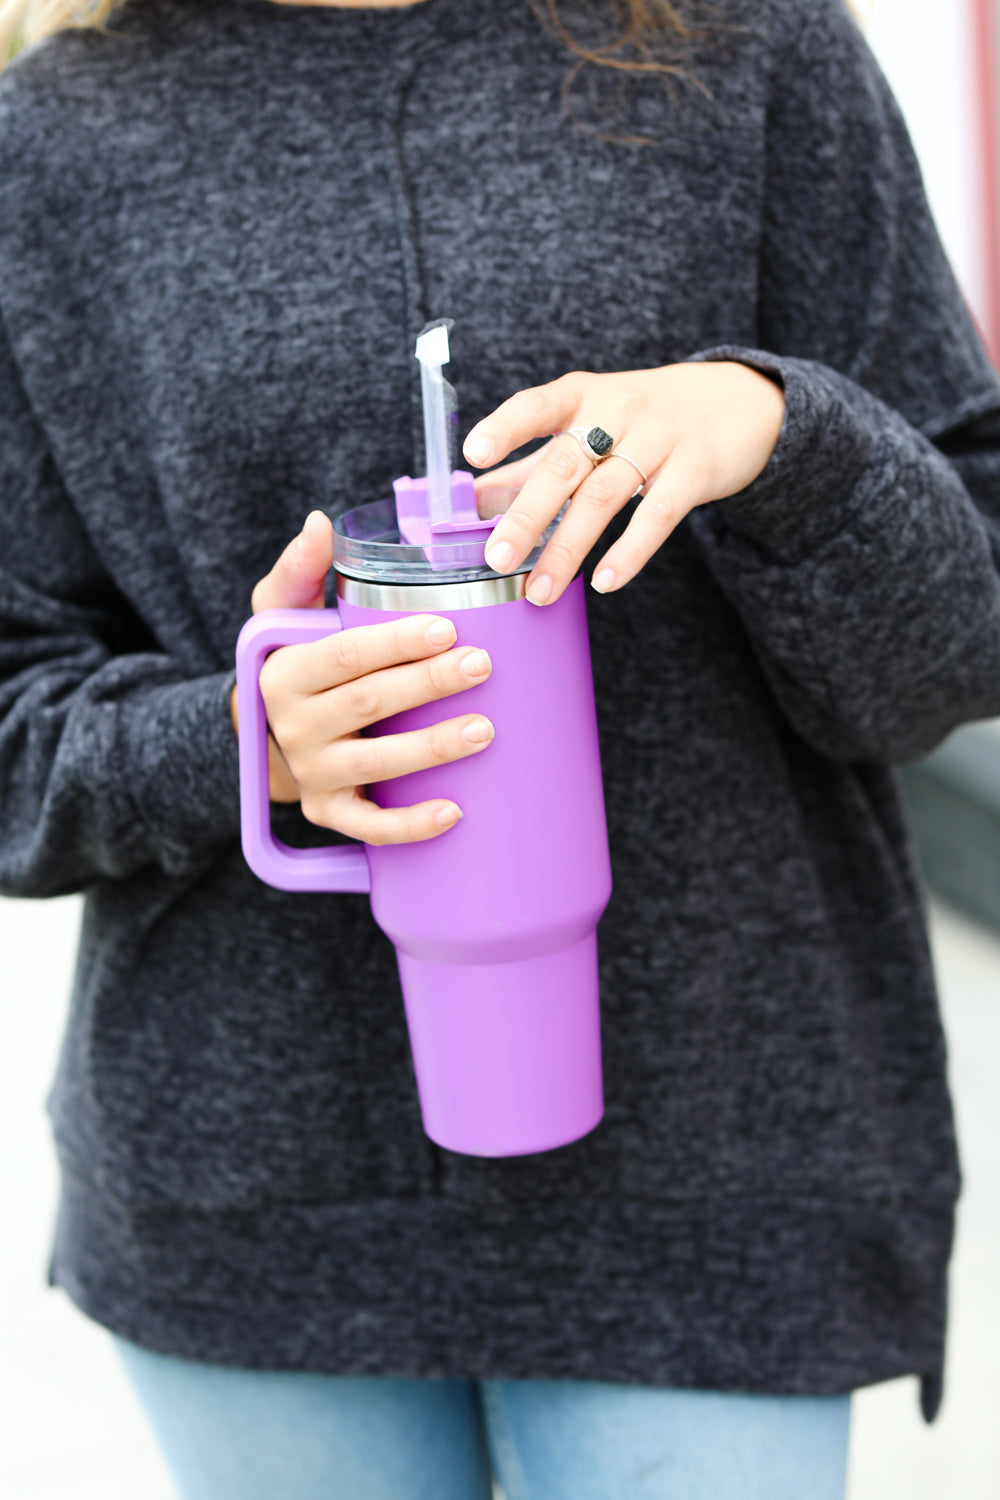 Purple Insulated 38oz. Tumbler with Straw